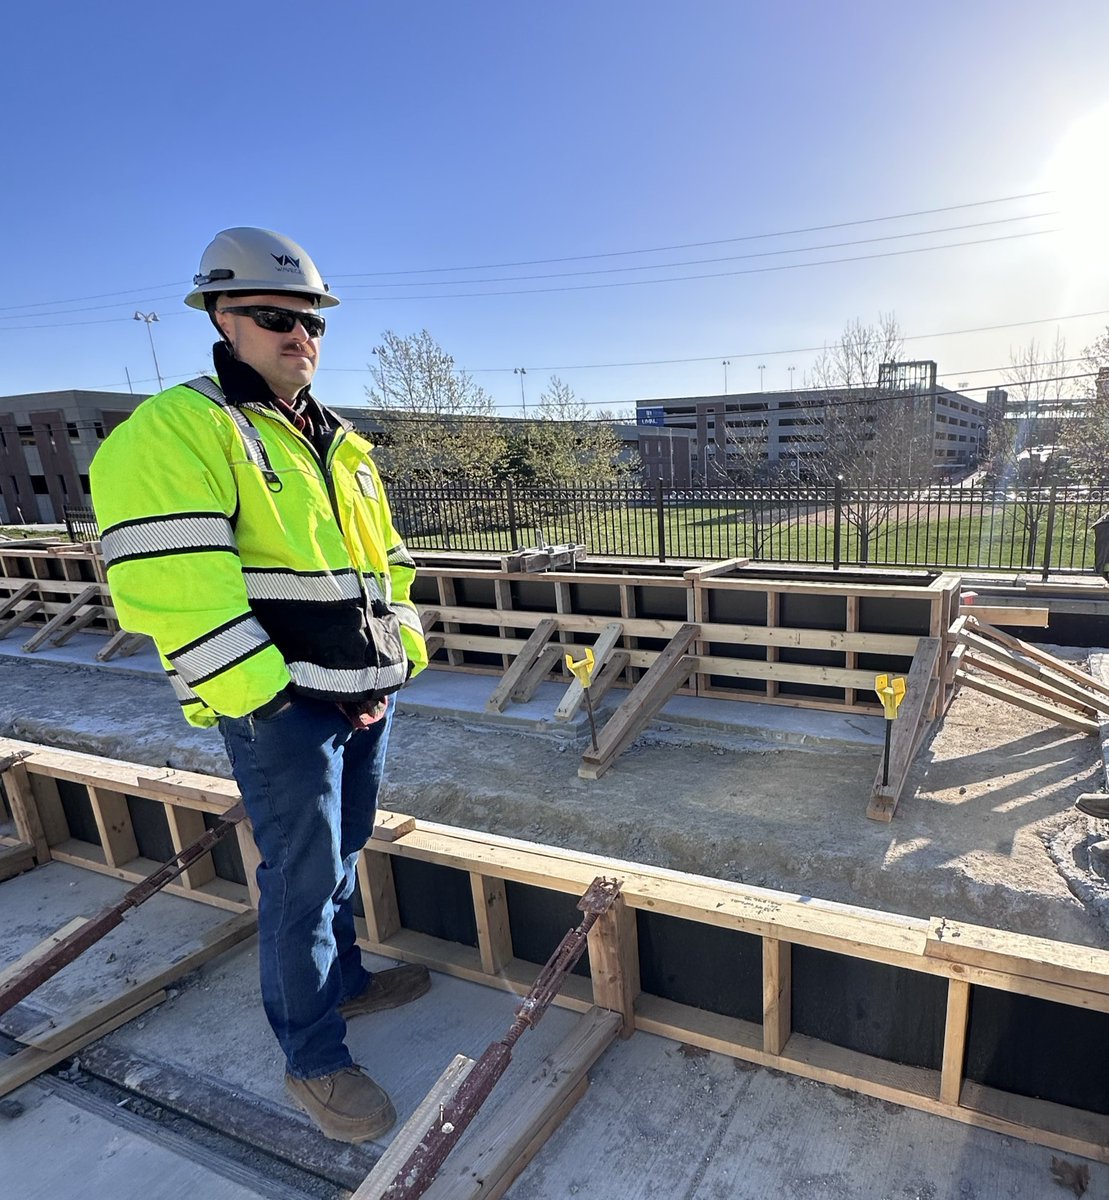 Safety is always top of mind for #BuildKCSC!

During #ConstructionSafetyWeek we’re following our Safety Manager, Justin Kirkland, on a job walk.

Justin looks at a different part of the corridor daily to ensure all work is being done safely.
(1/4)